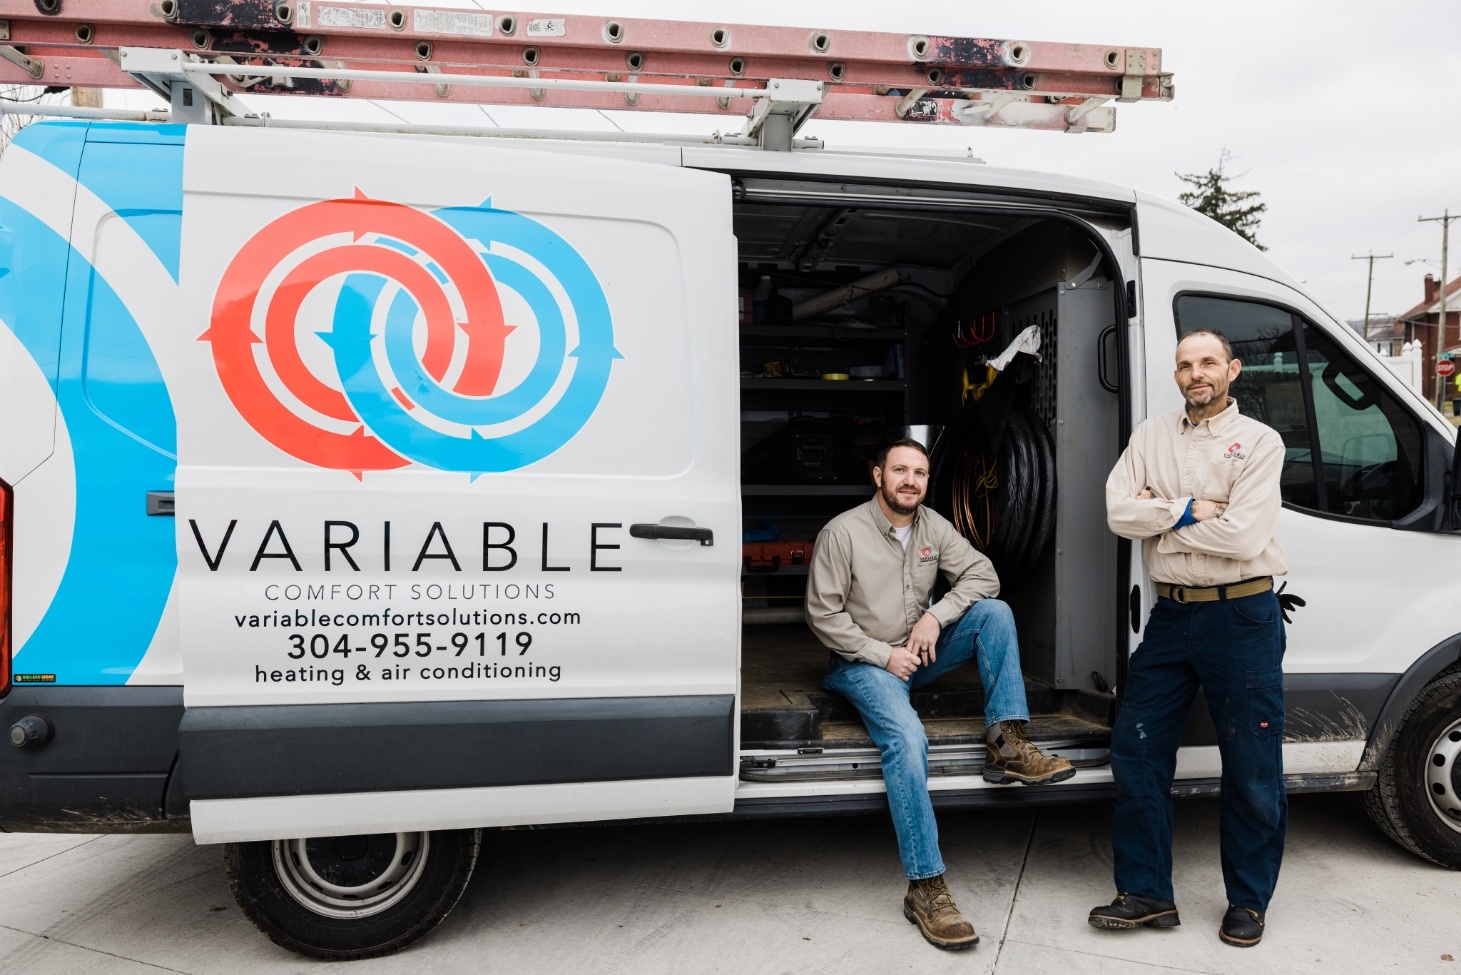 Variable Comfort Solutions employees sitting in branded truck